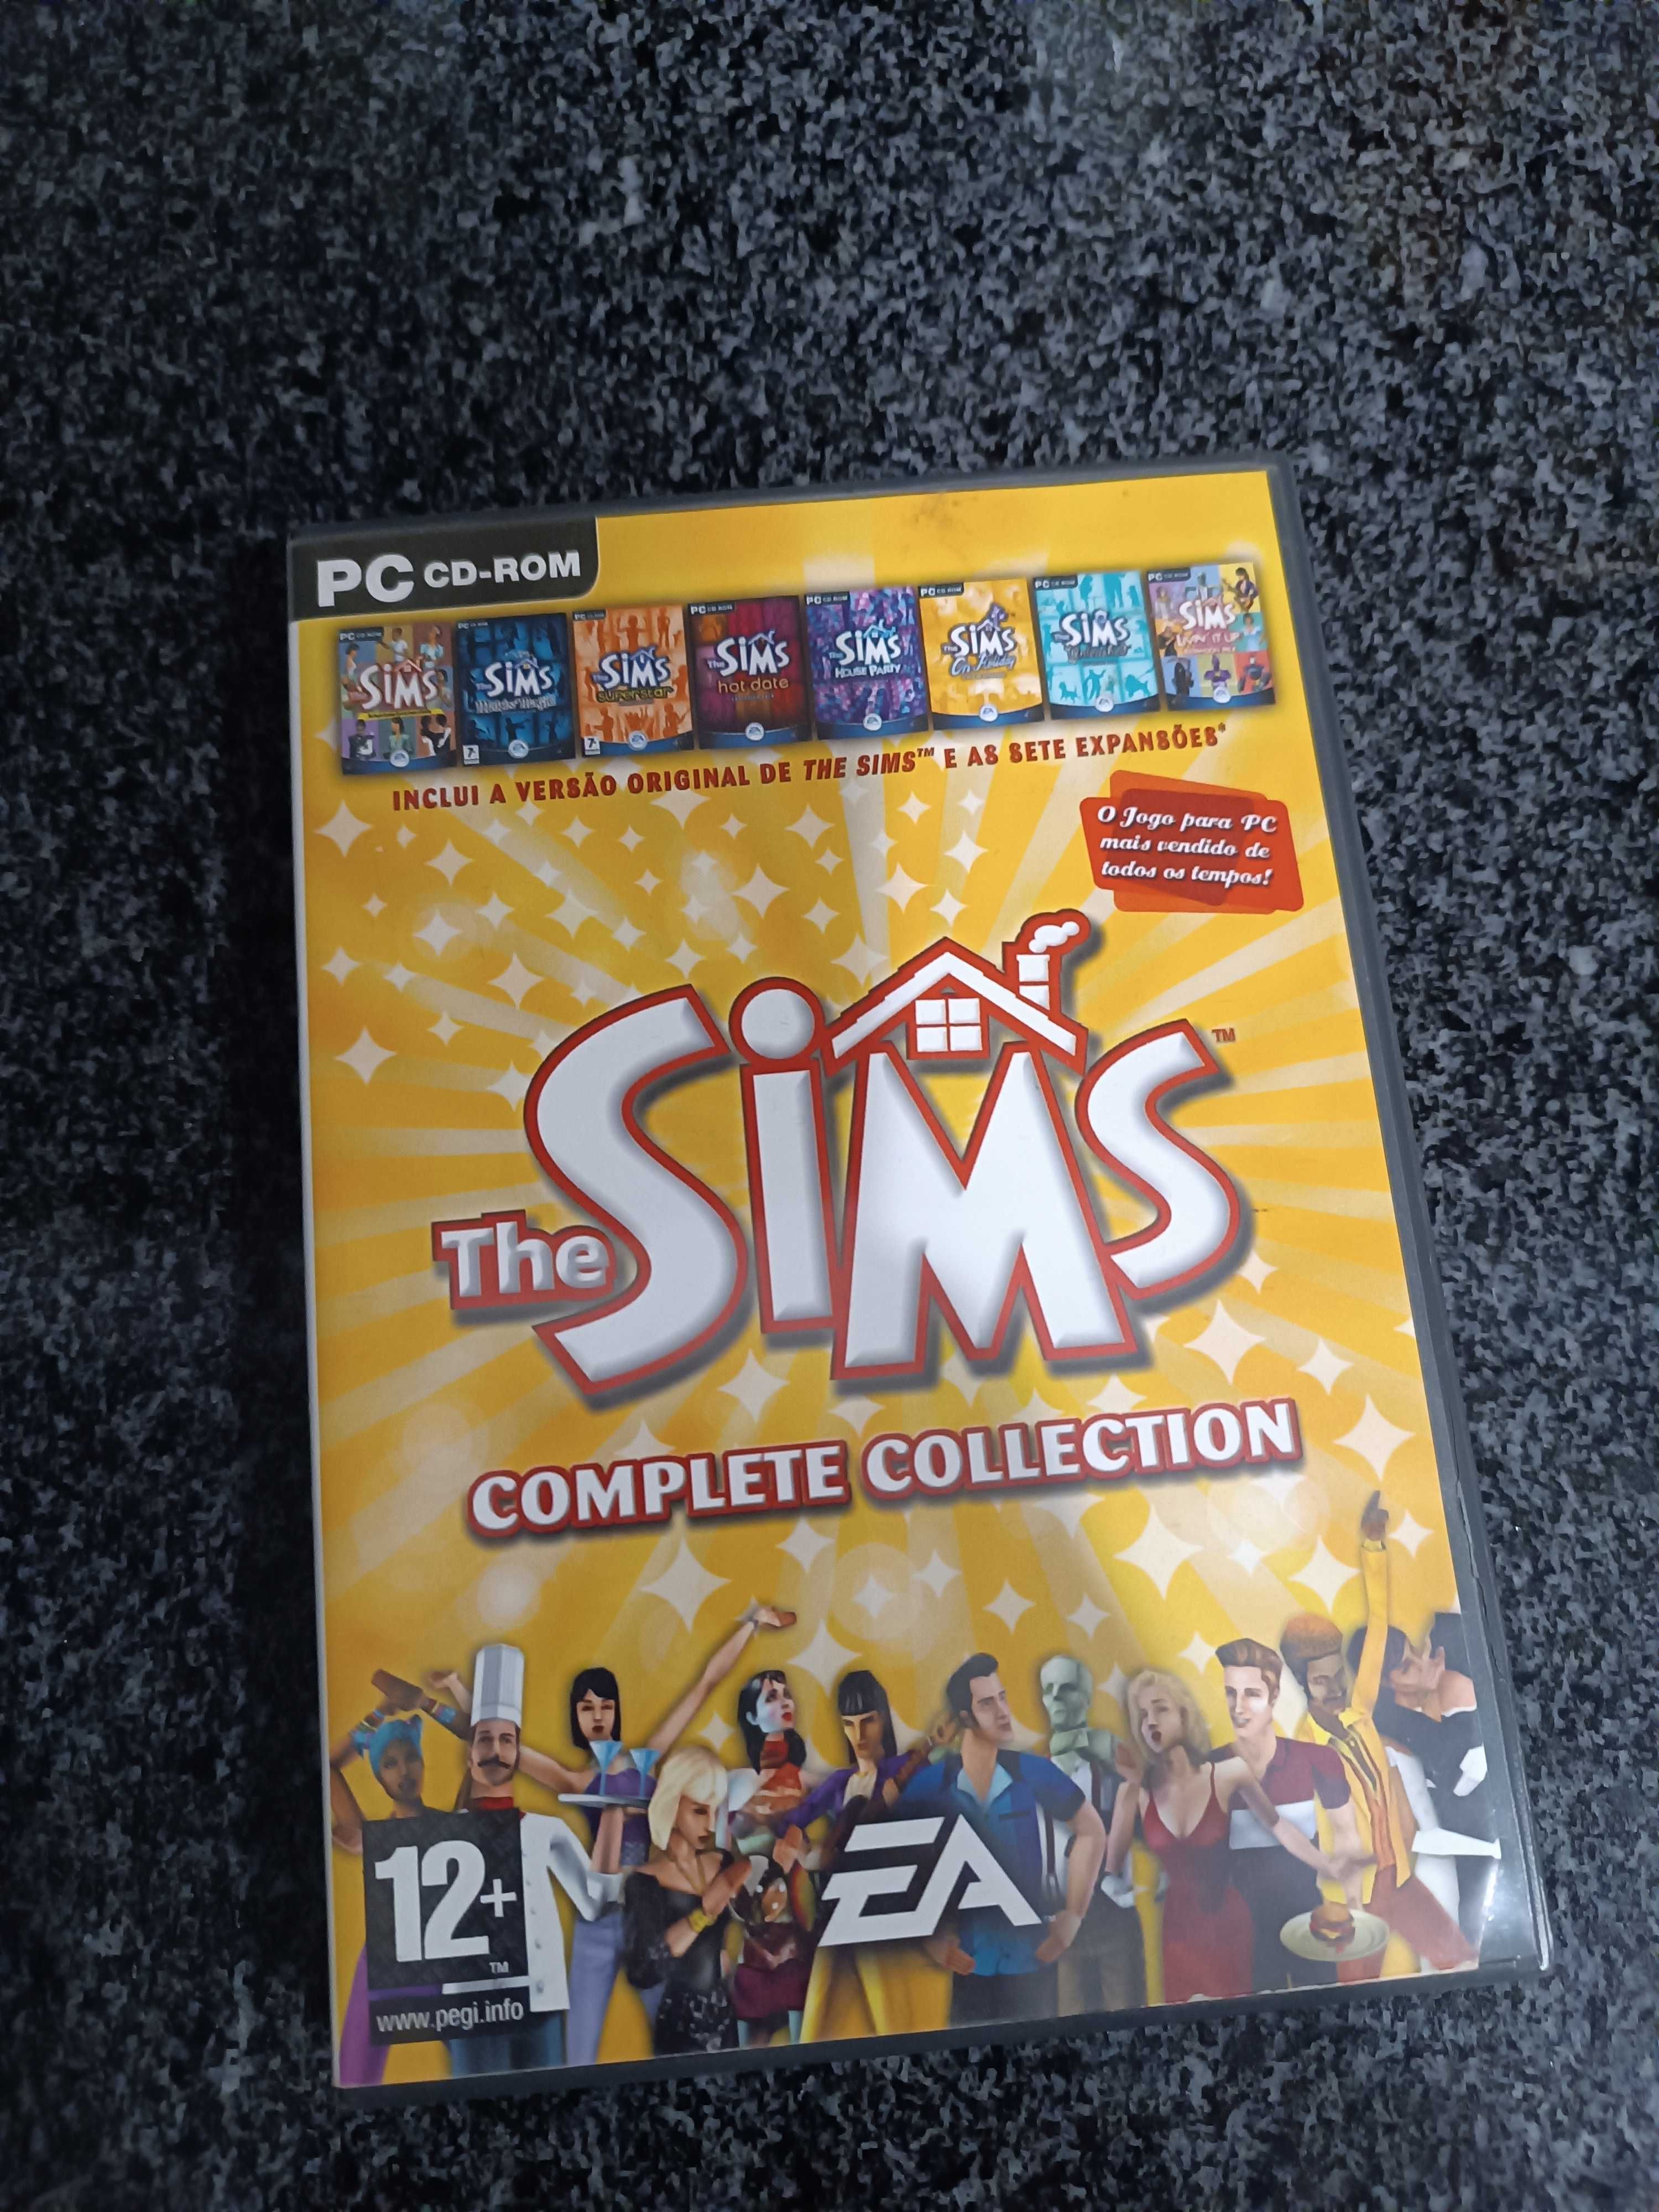 The Sims Complete Collection